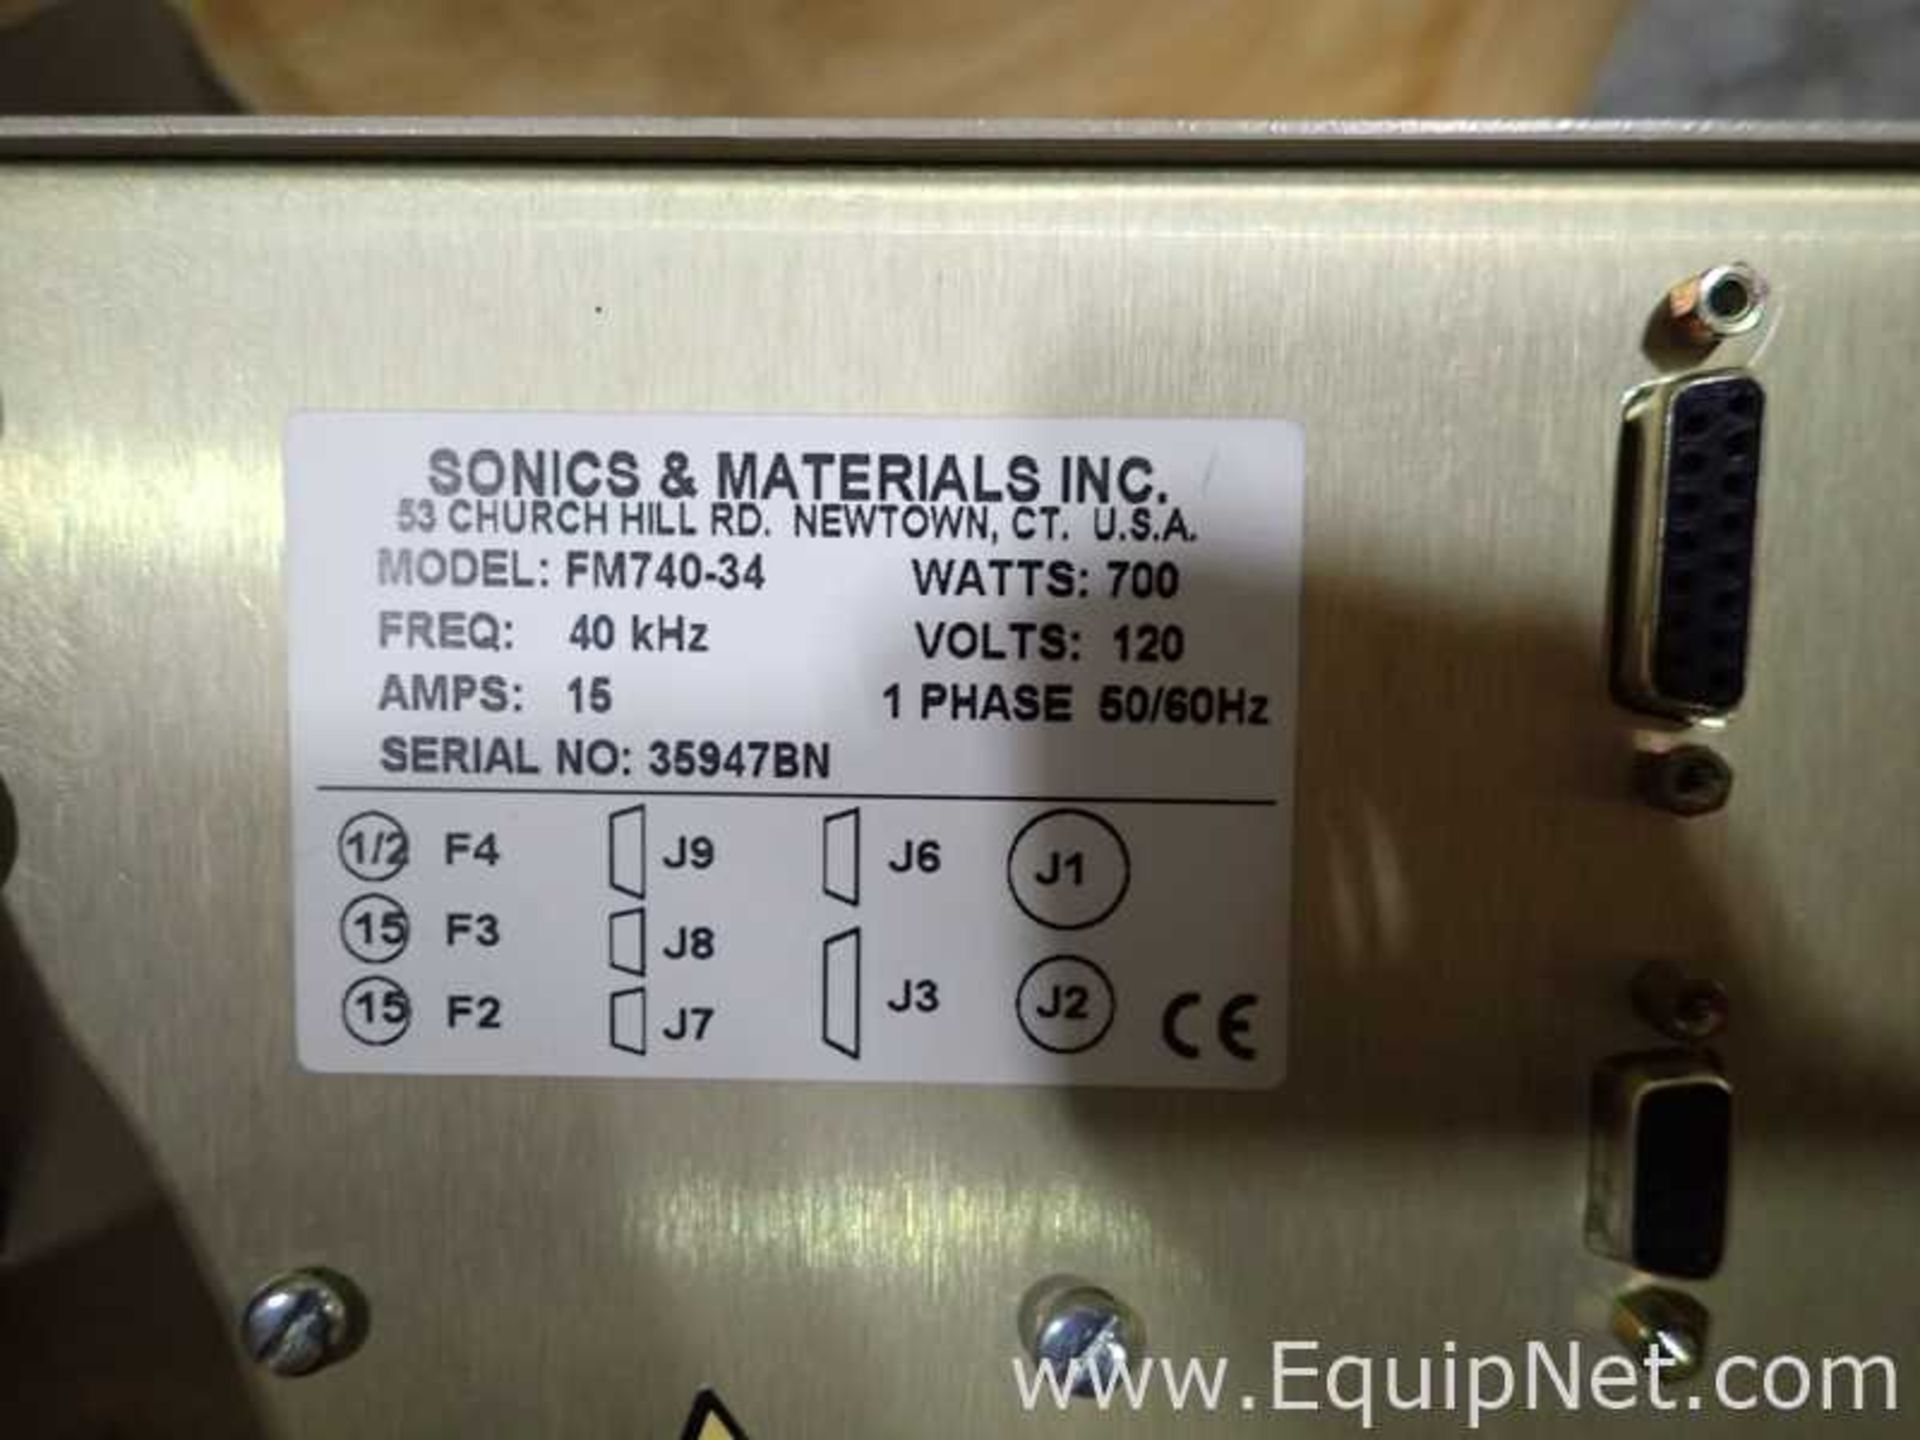 Sonics and Materials 4095 Pneumatic Press with Microsonic Processor for Ultrasonic Plastic Assembly - Image 10 of 10